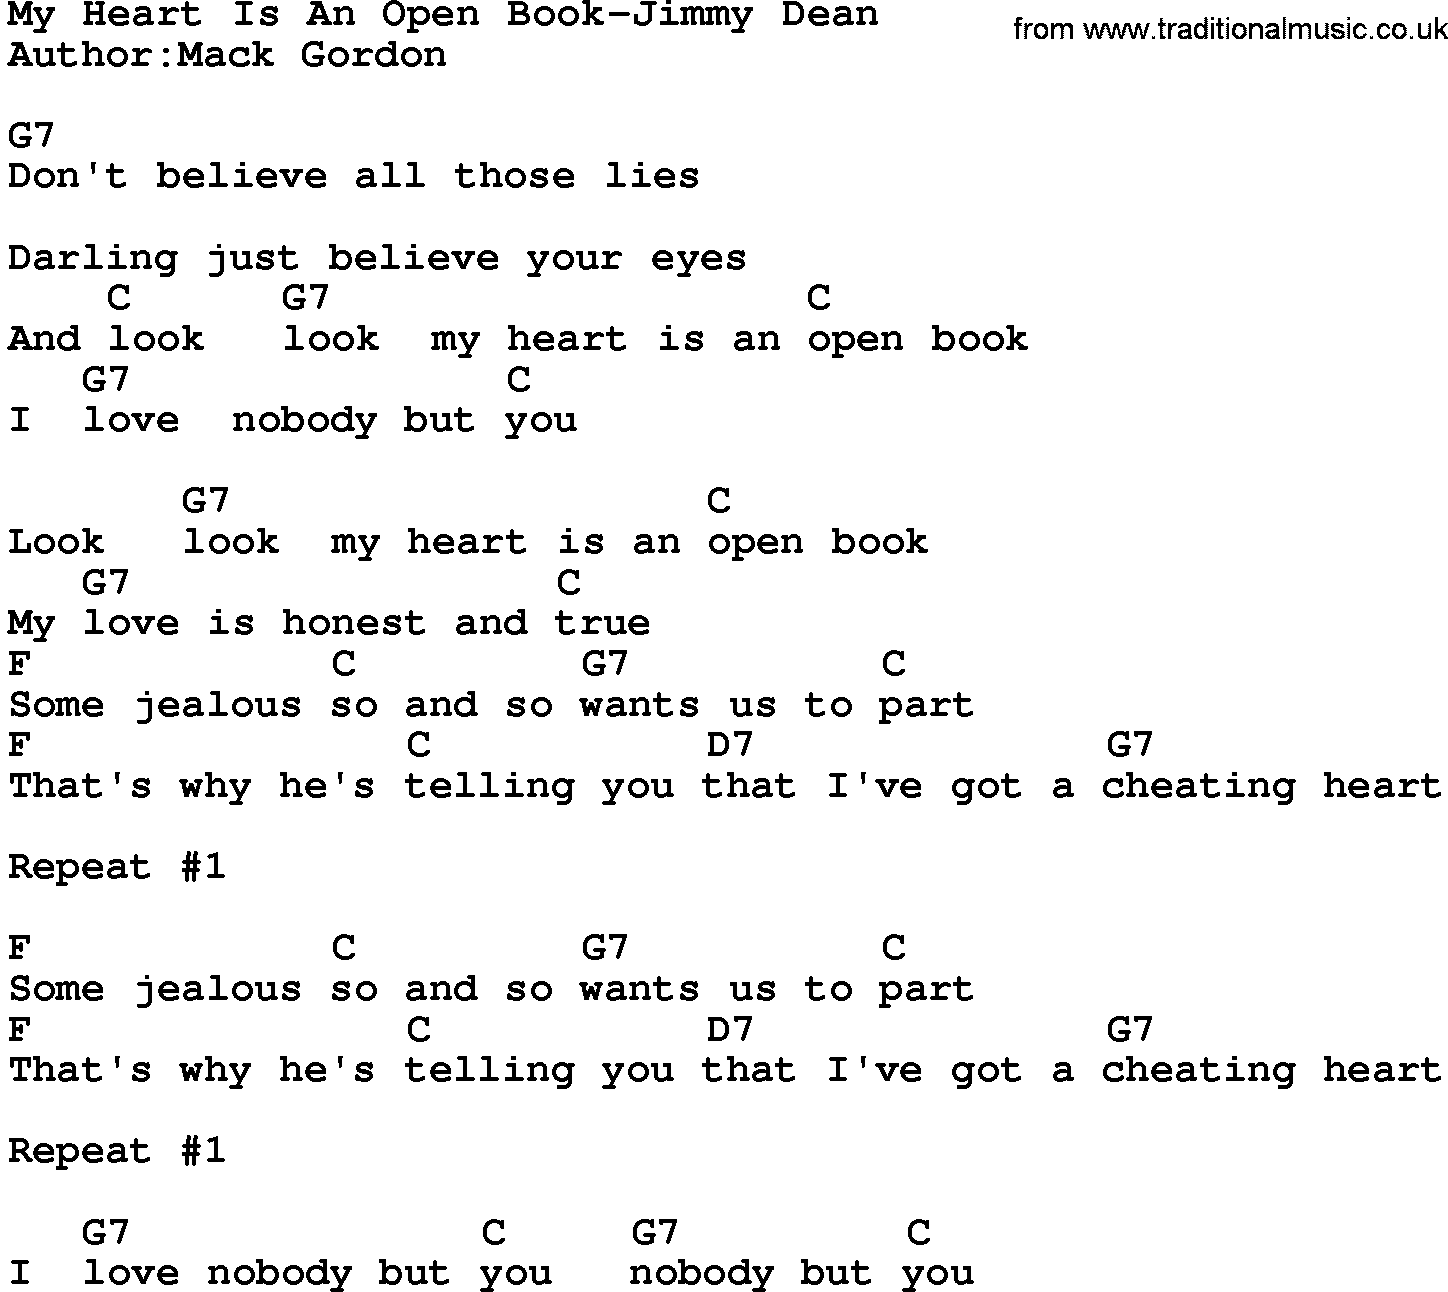 Country music song: My Heart Is An Open Book-Jimmy Dean lyrics and chords